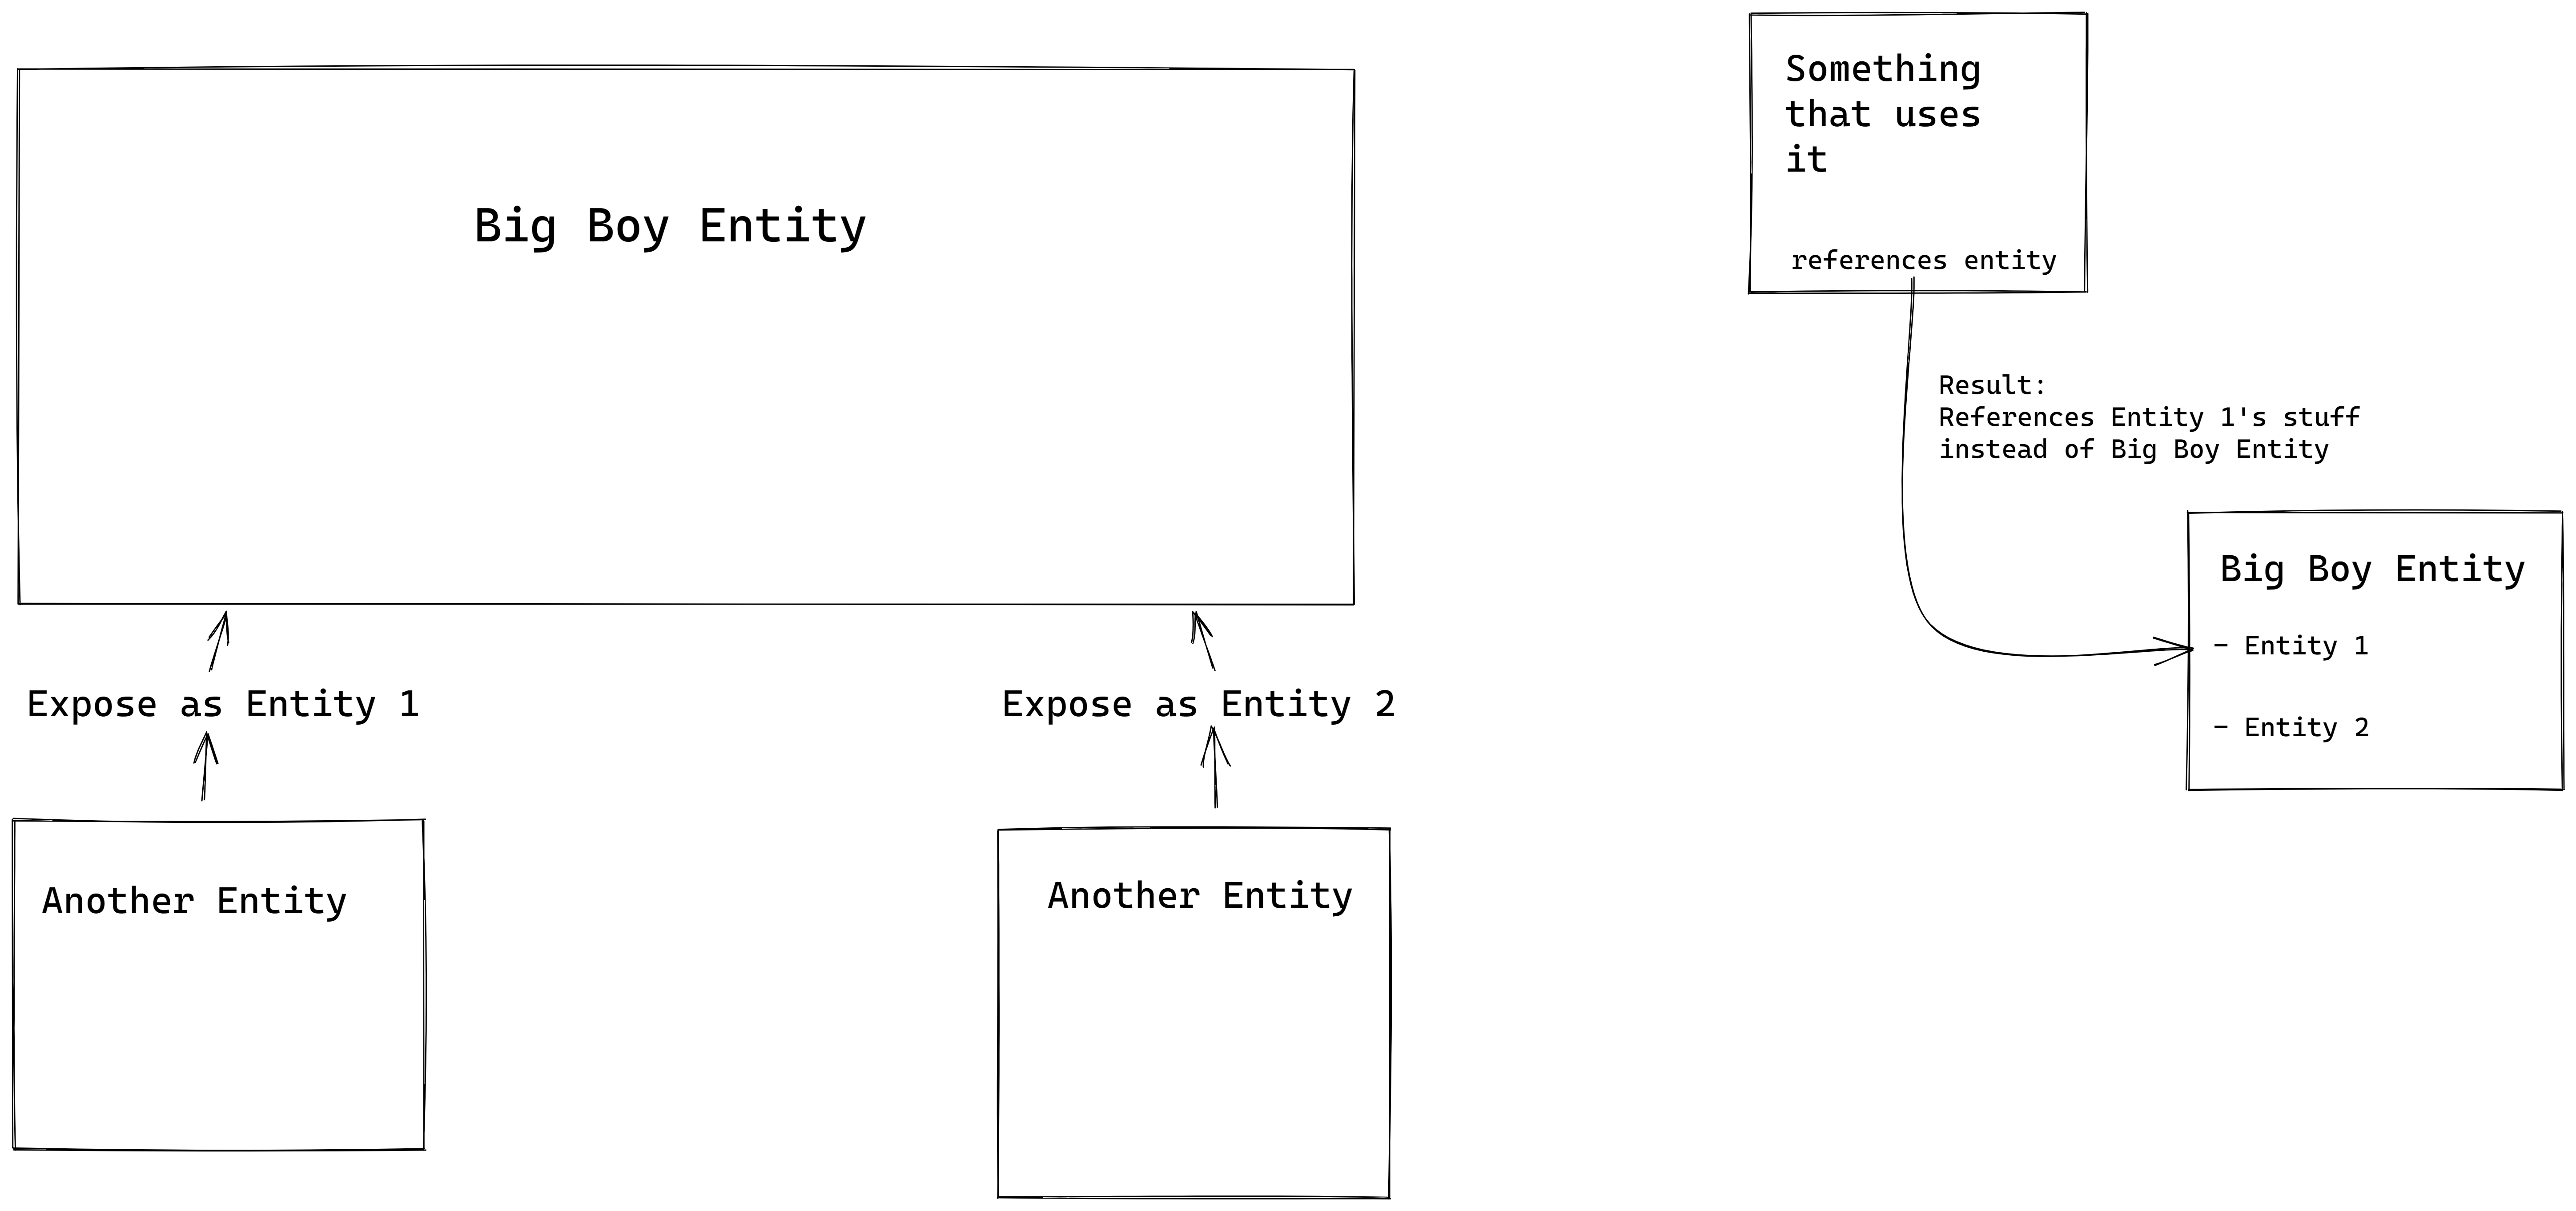 A diagram of how exposed entities can be used to reference normally inaccessible sub-entities.